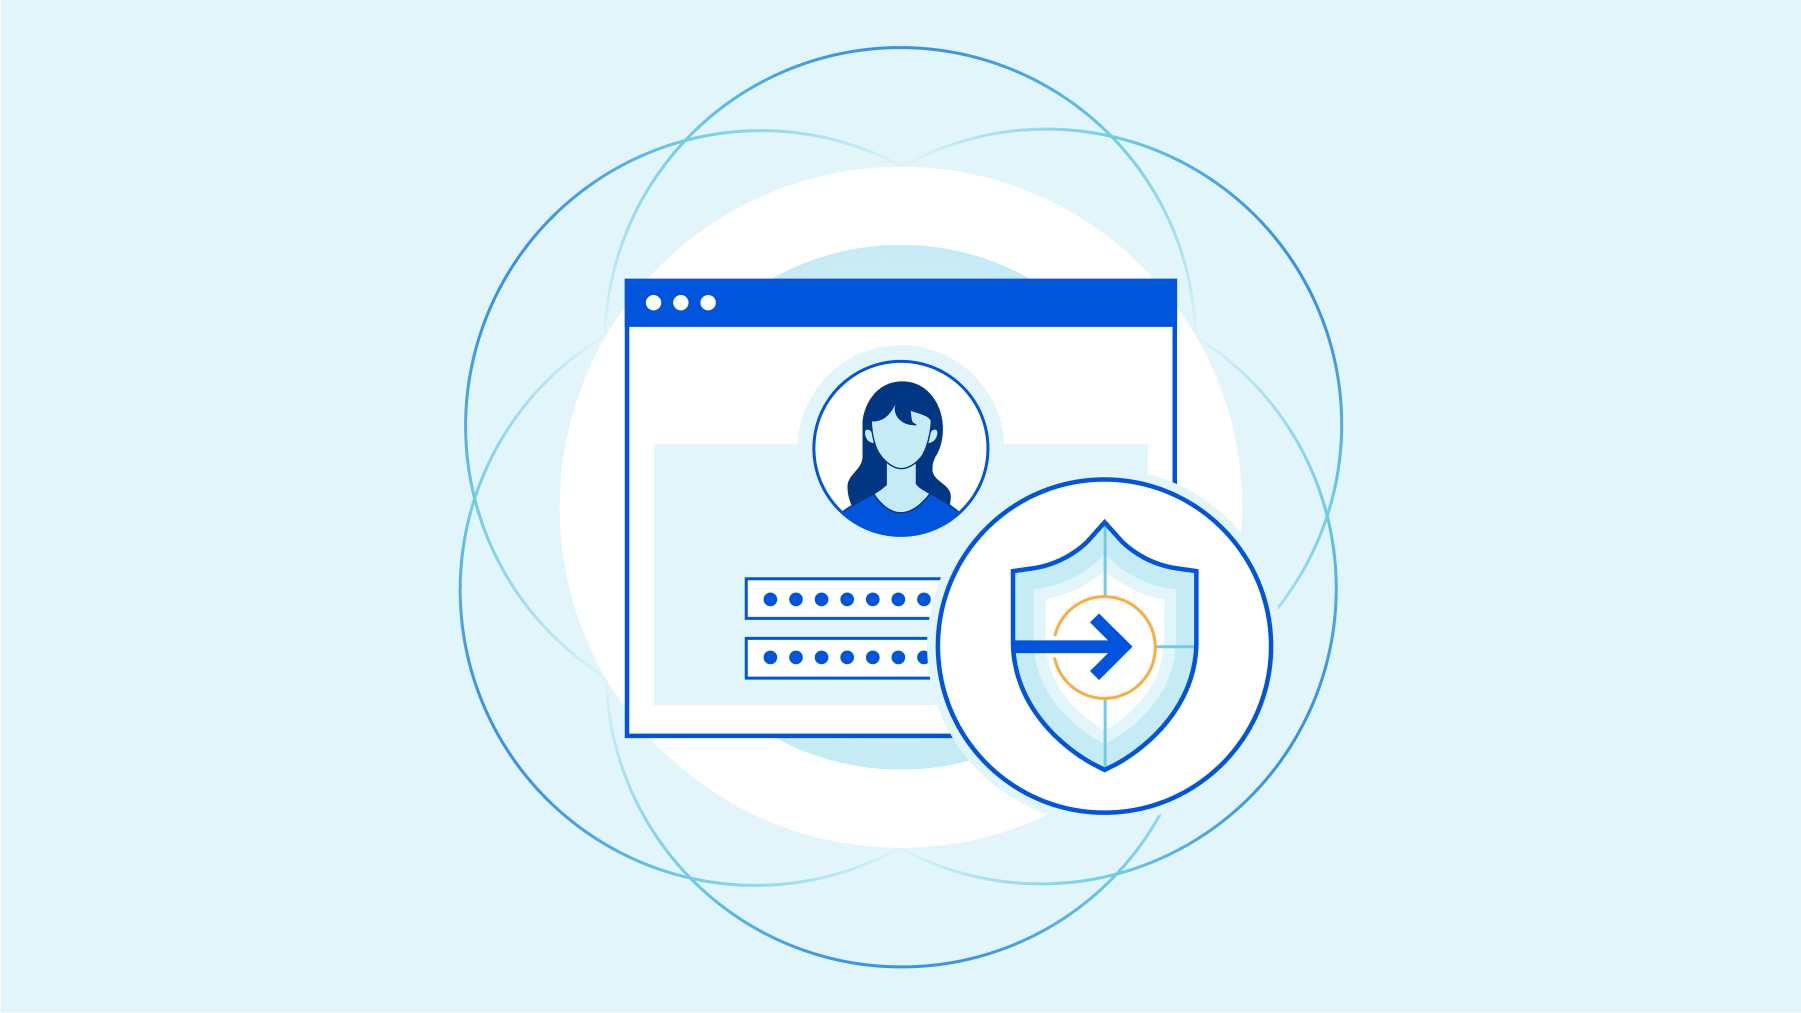 One-click data security for your internal and SaaS applications